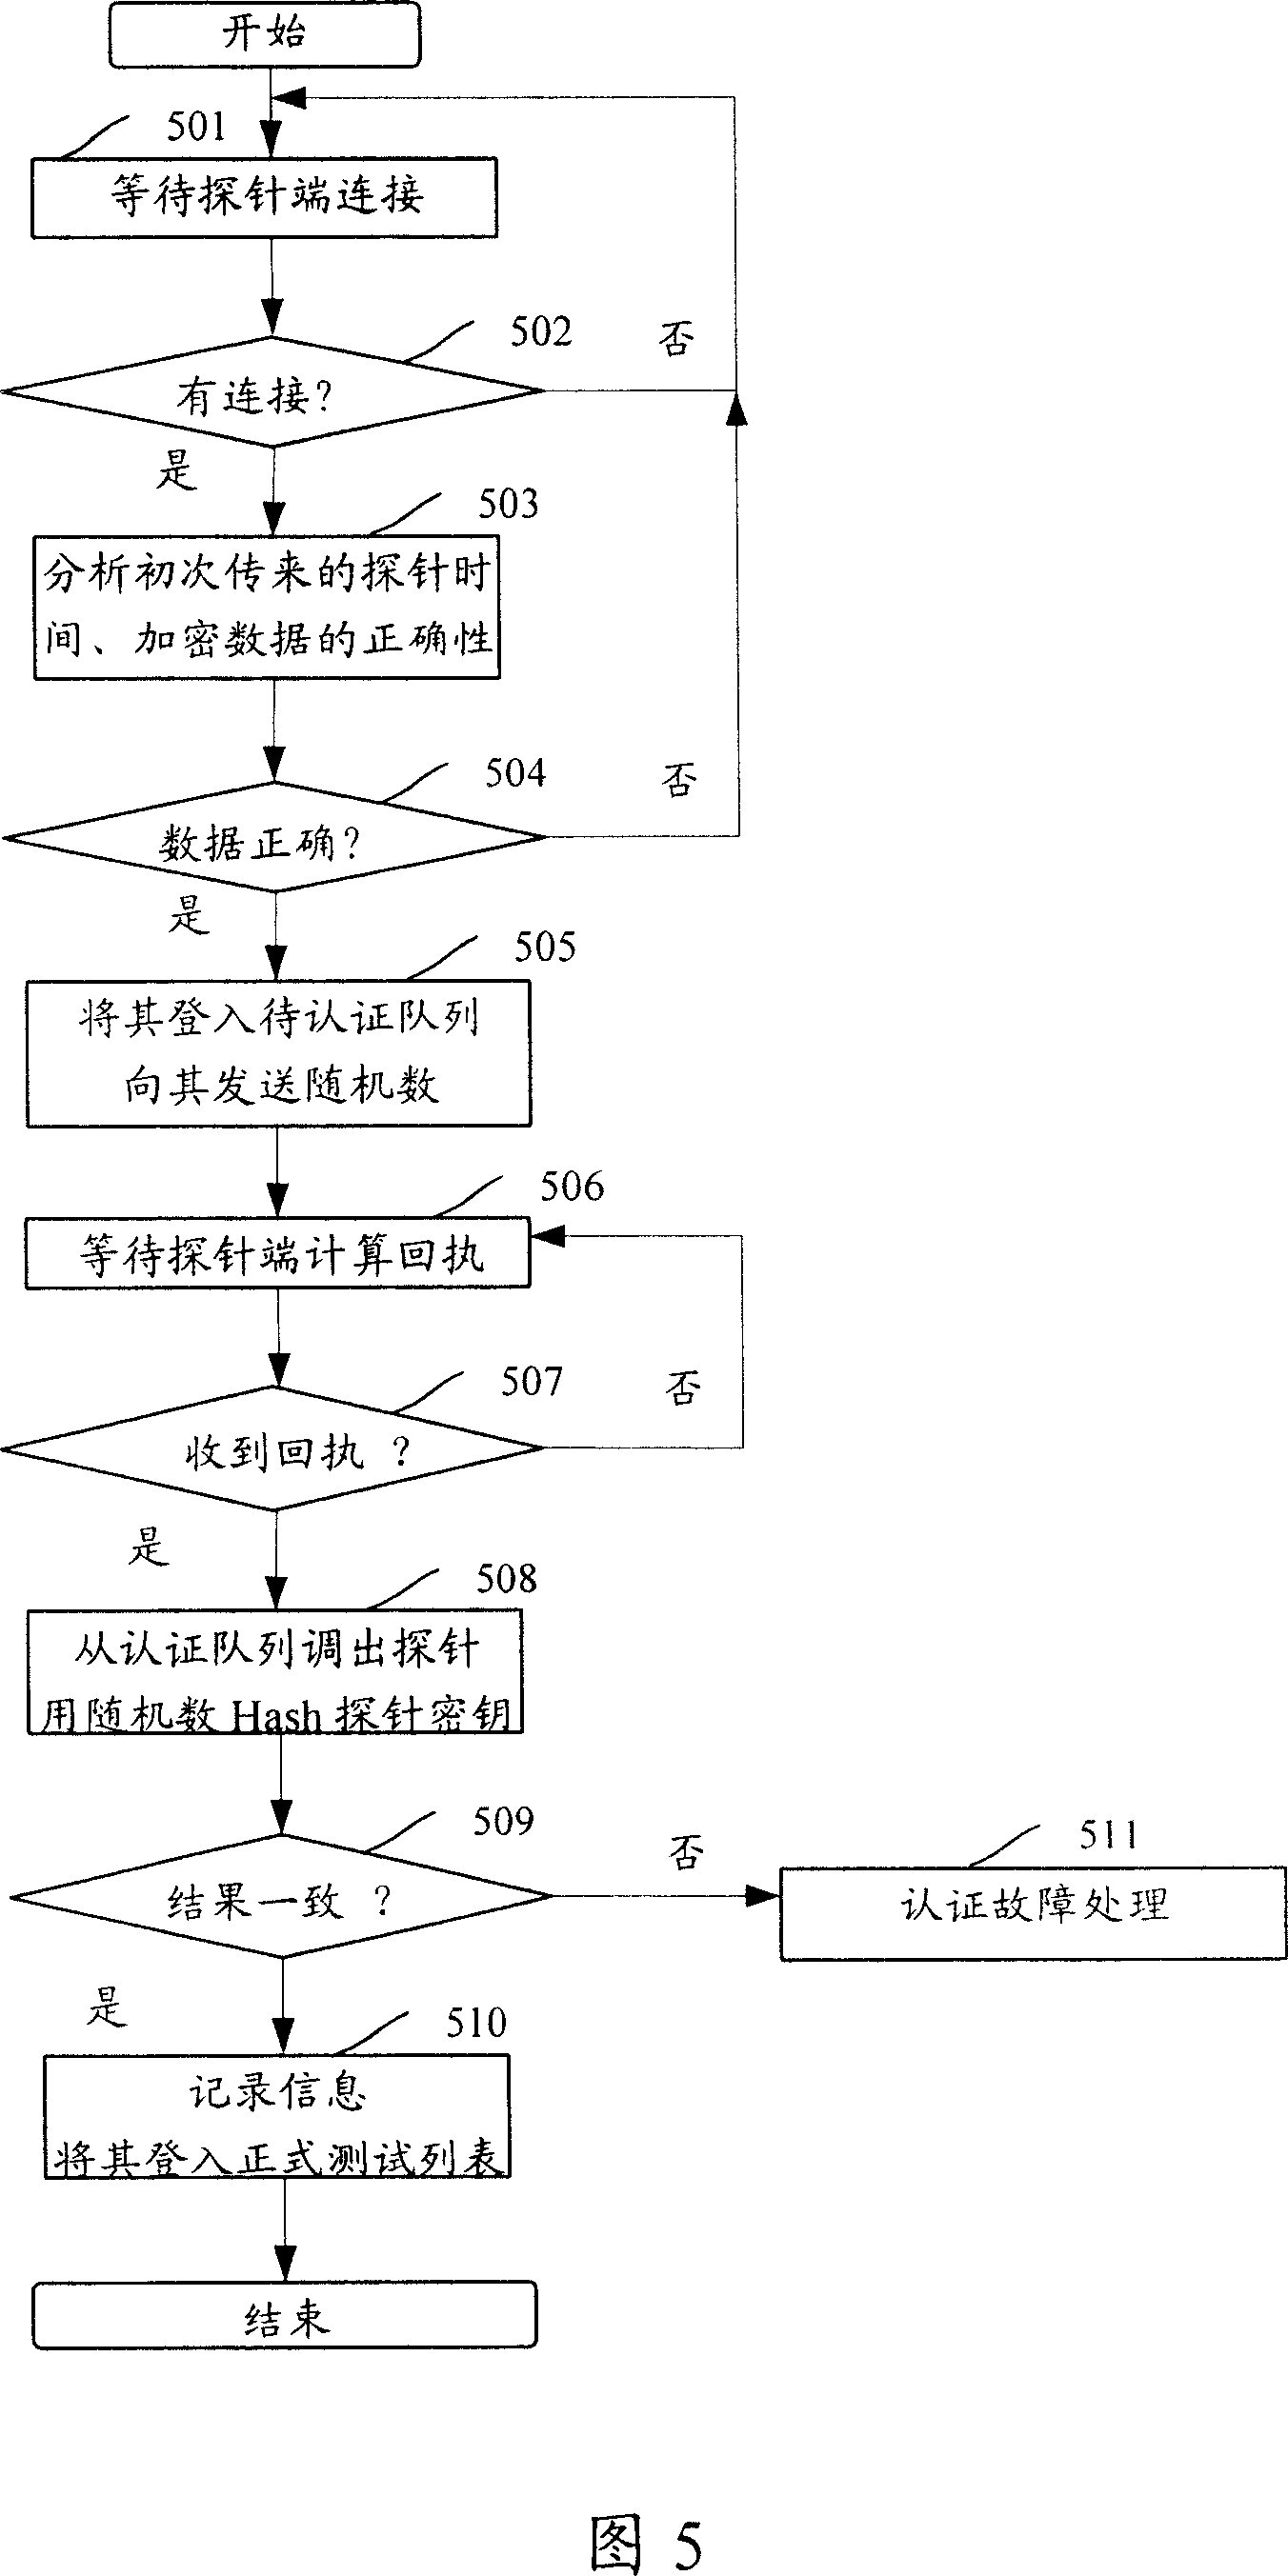 Internet protocol network end-to-end performance monitoring system and method